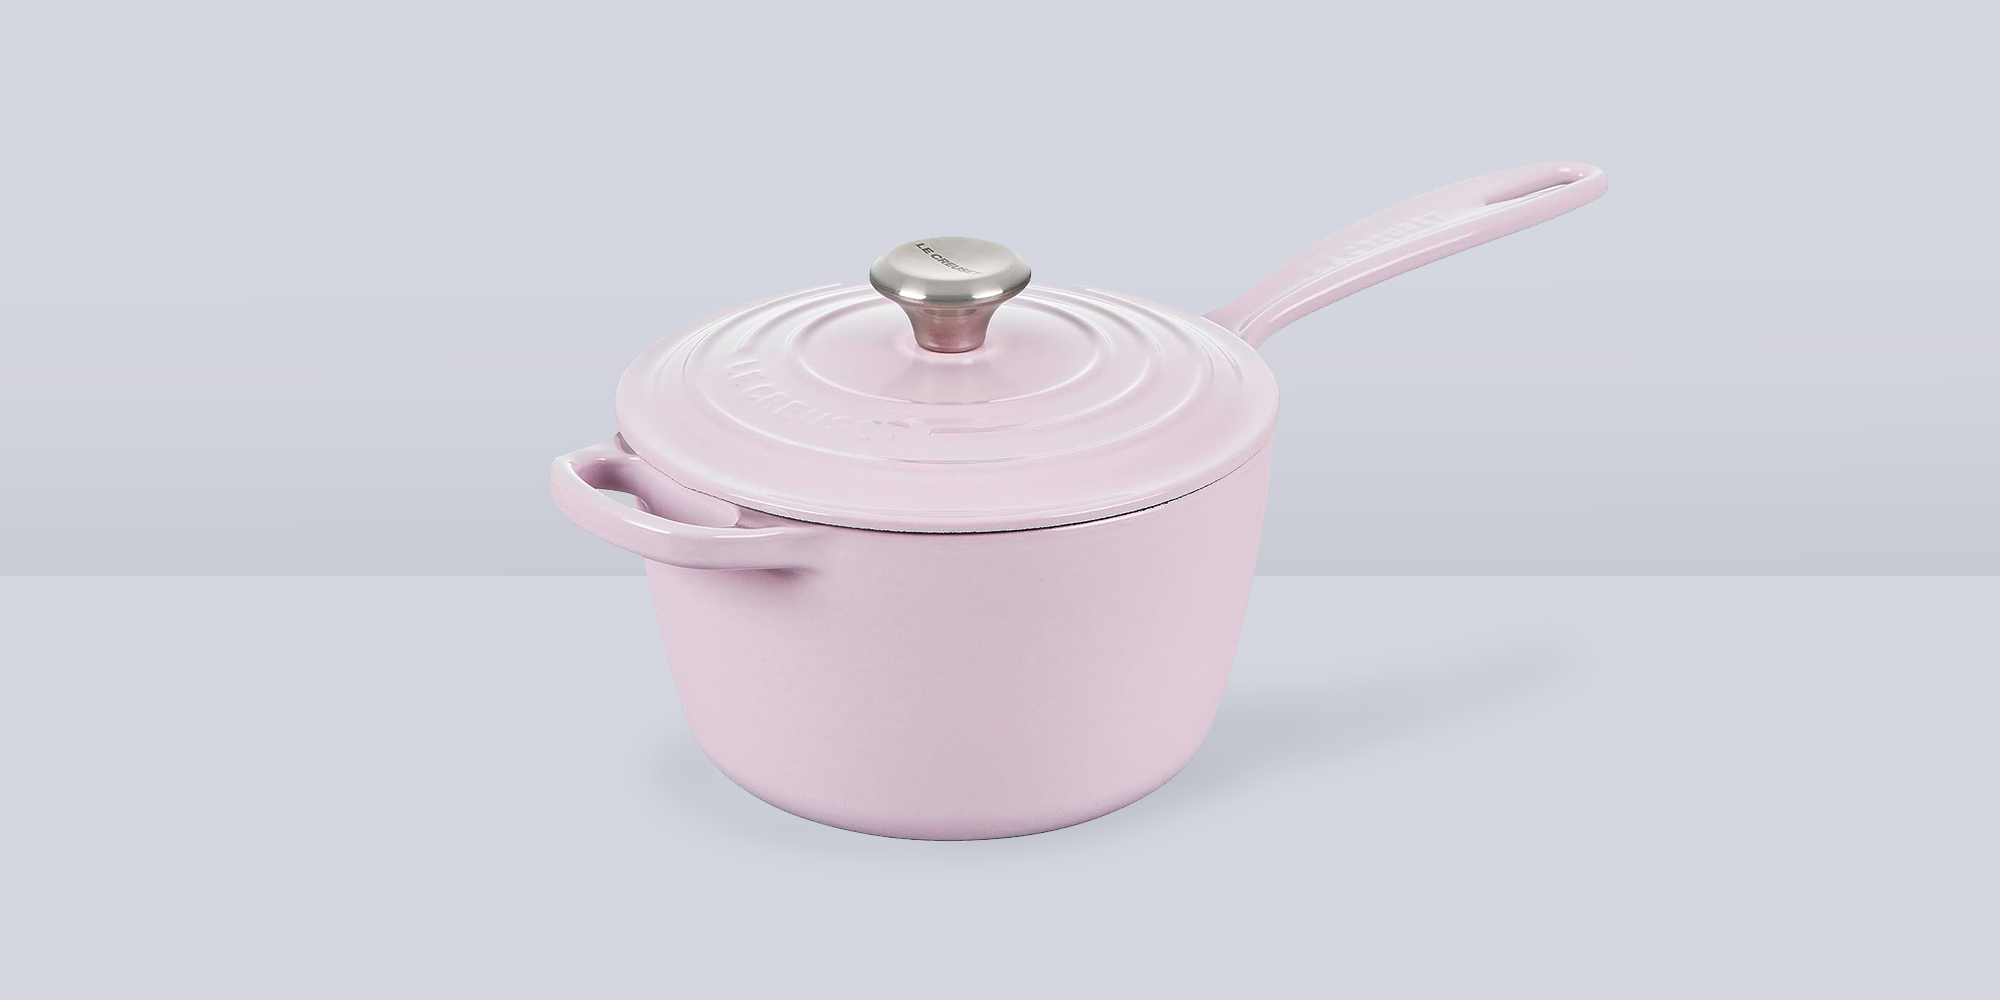 Le Creuset Just Brought Back Its Gorgeous Pink Chiffon Collection